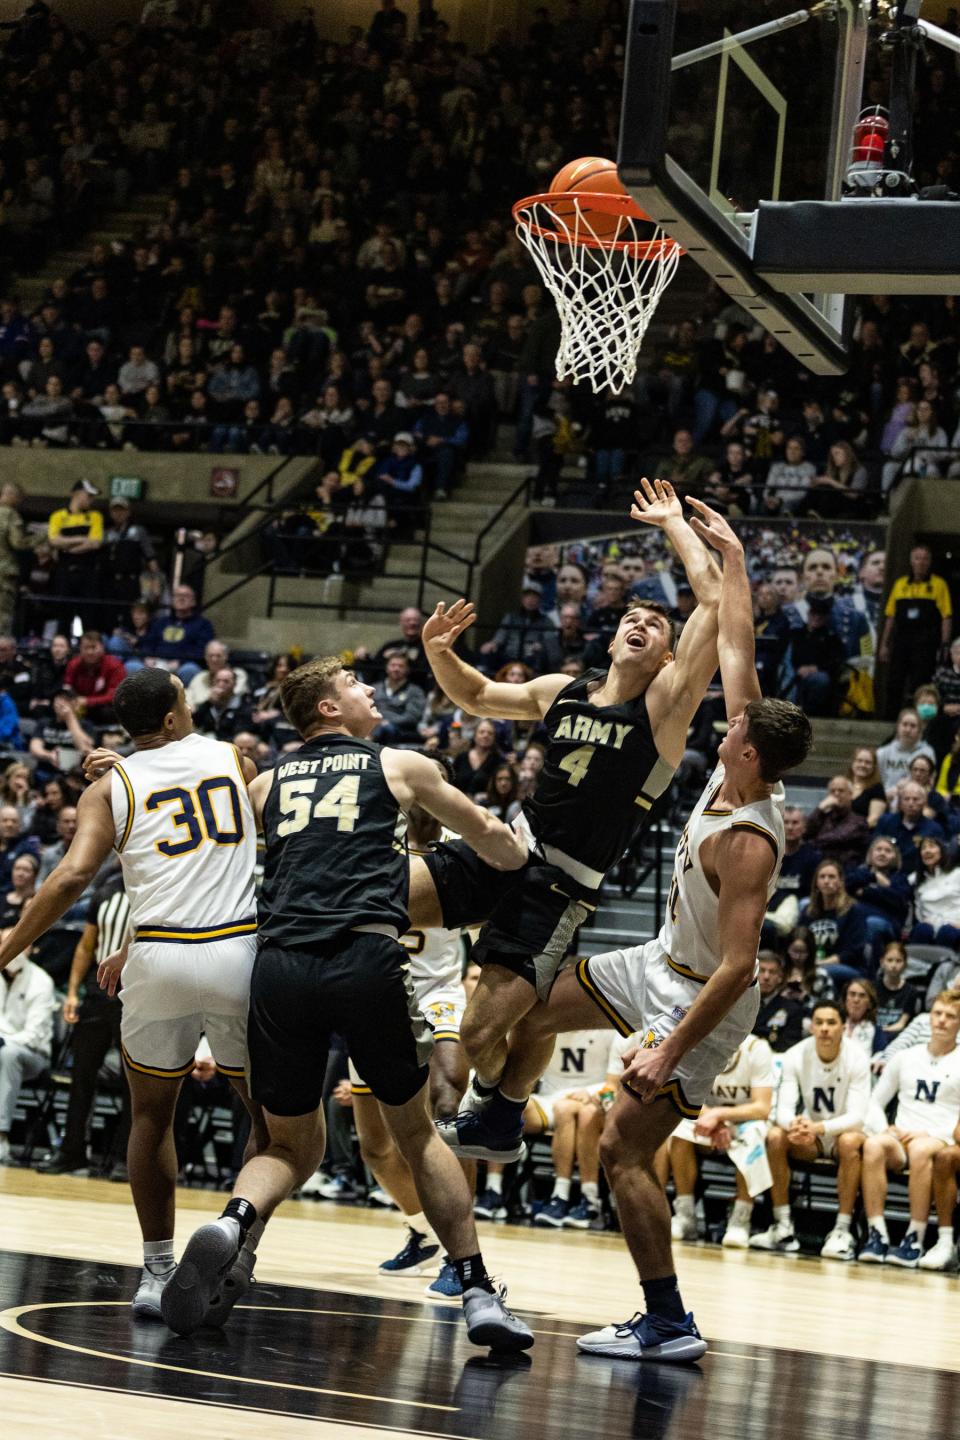 Army's Chris Mann scores on a tough shot in the paint against Navy on Saturday. ALLYSE PULLIAM/For the Times Herald-Record